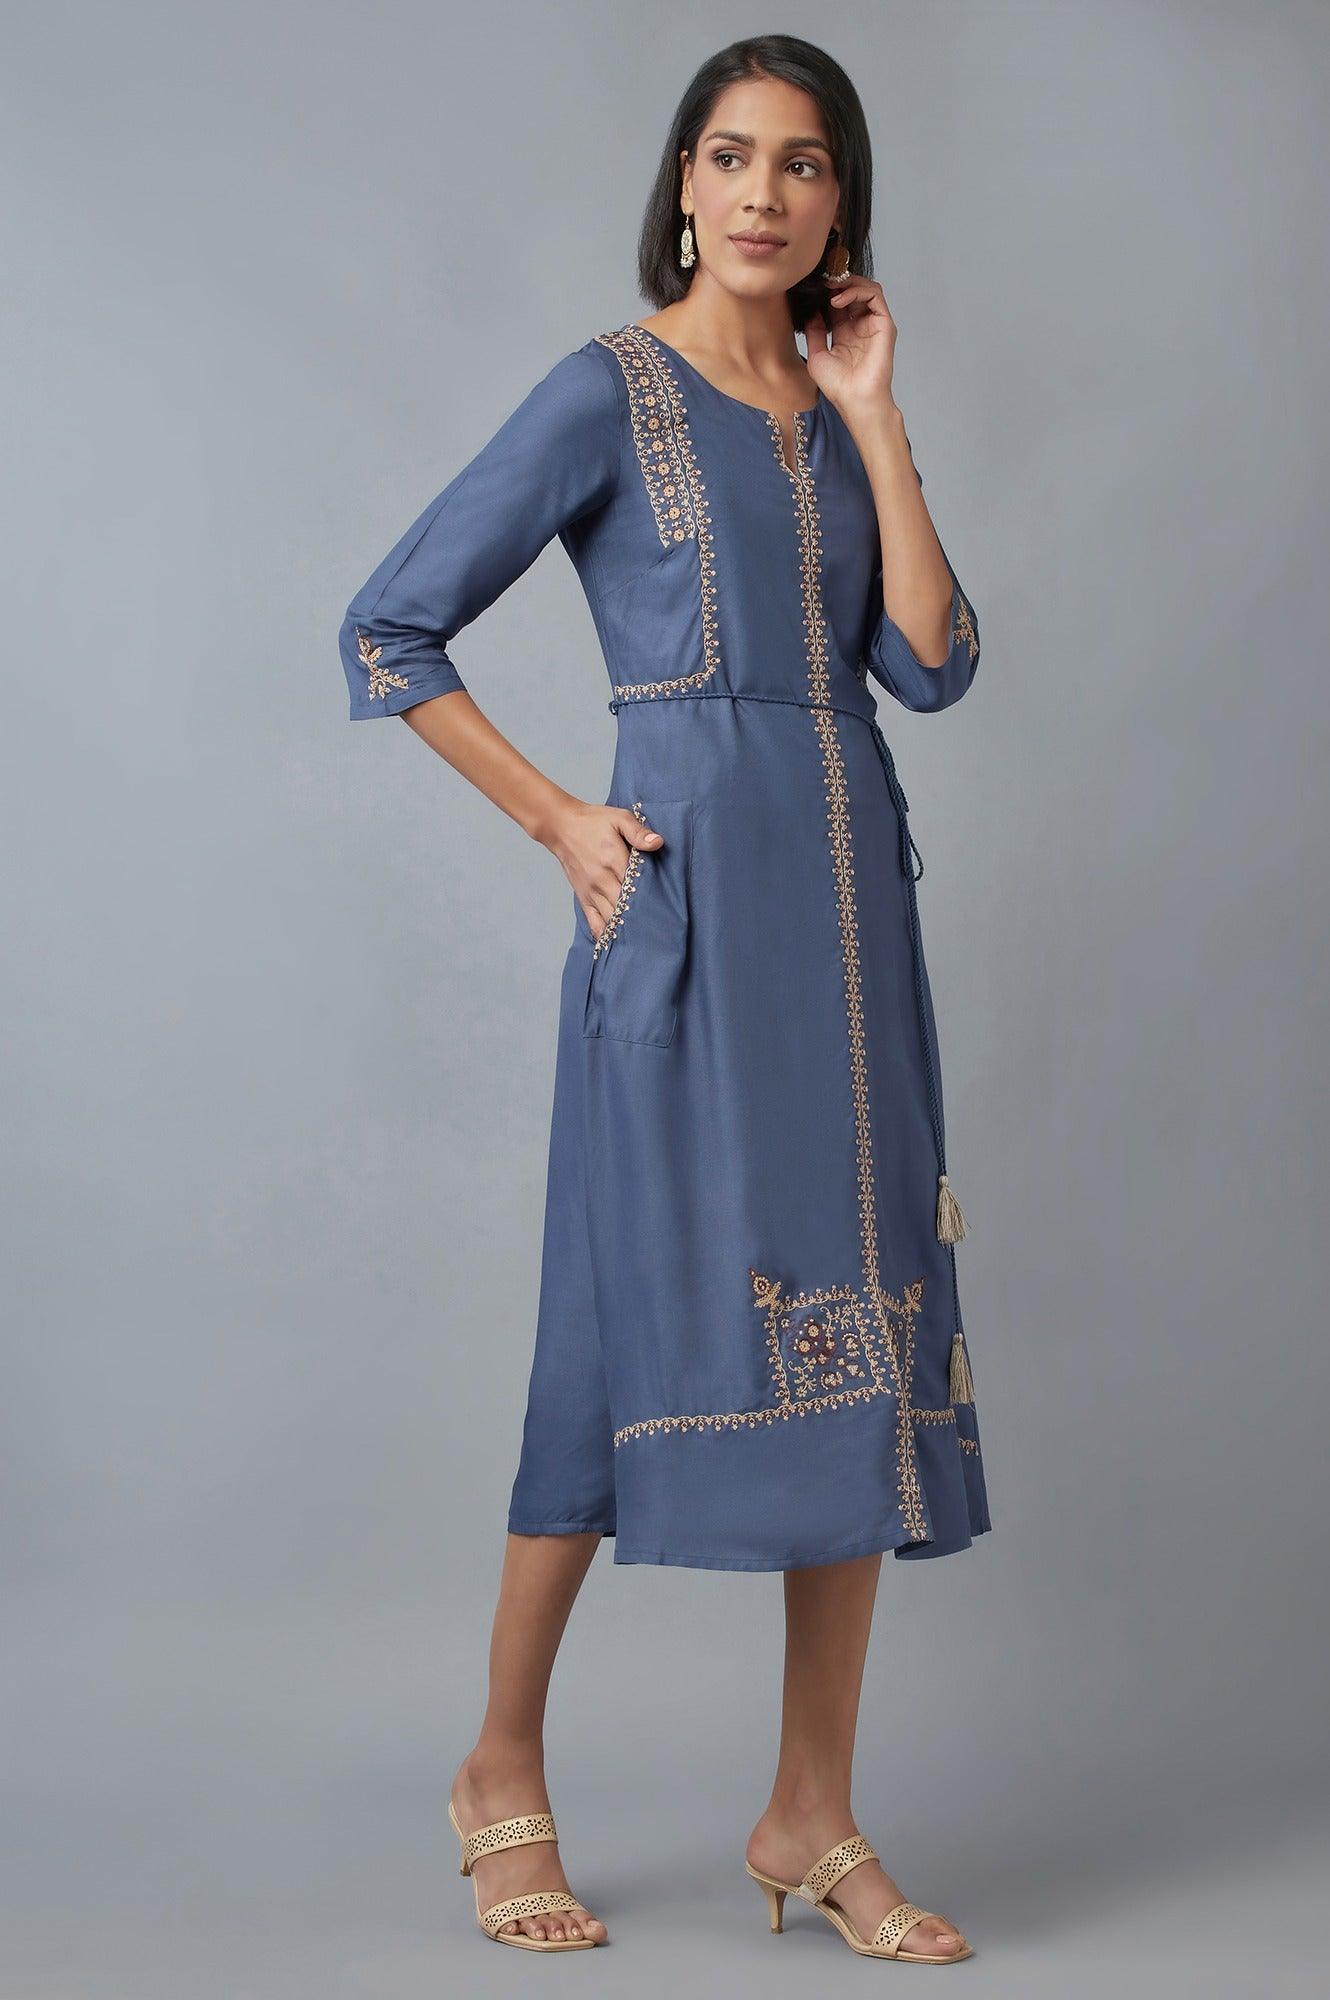 Steel Blue Embroidered Dress - wforwoman